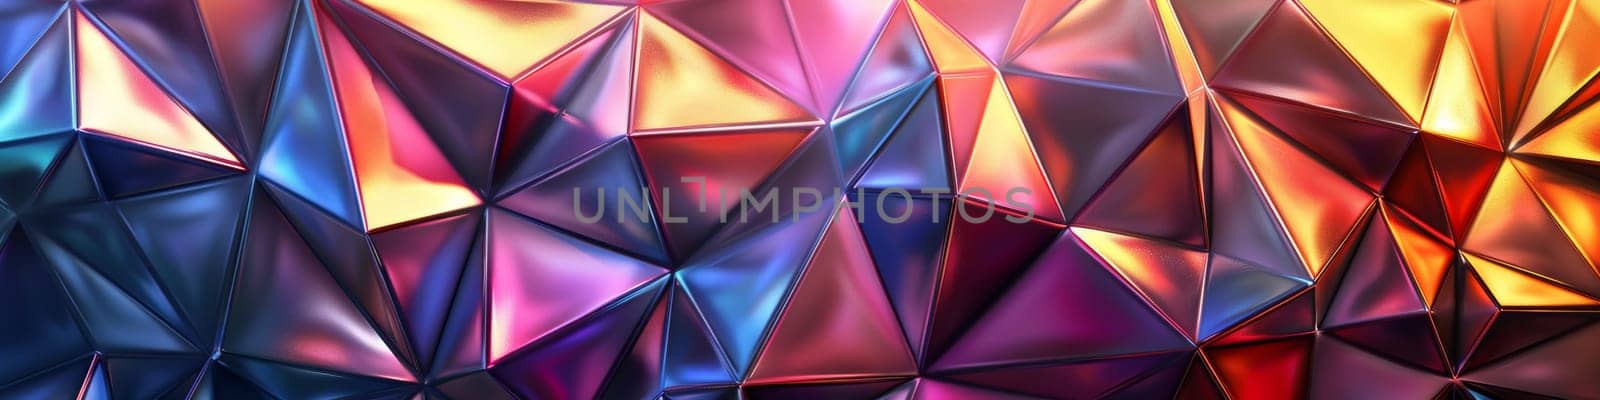 A colorful abstract background with a geometric pattern of triangles